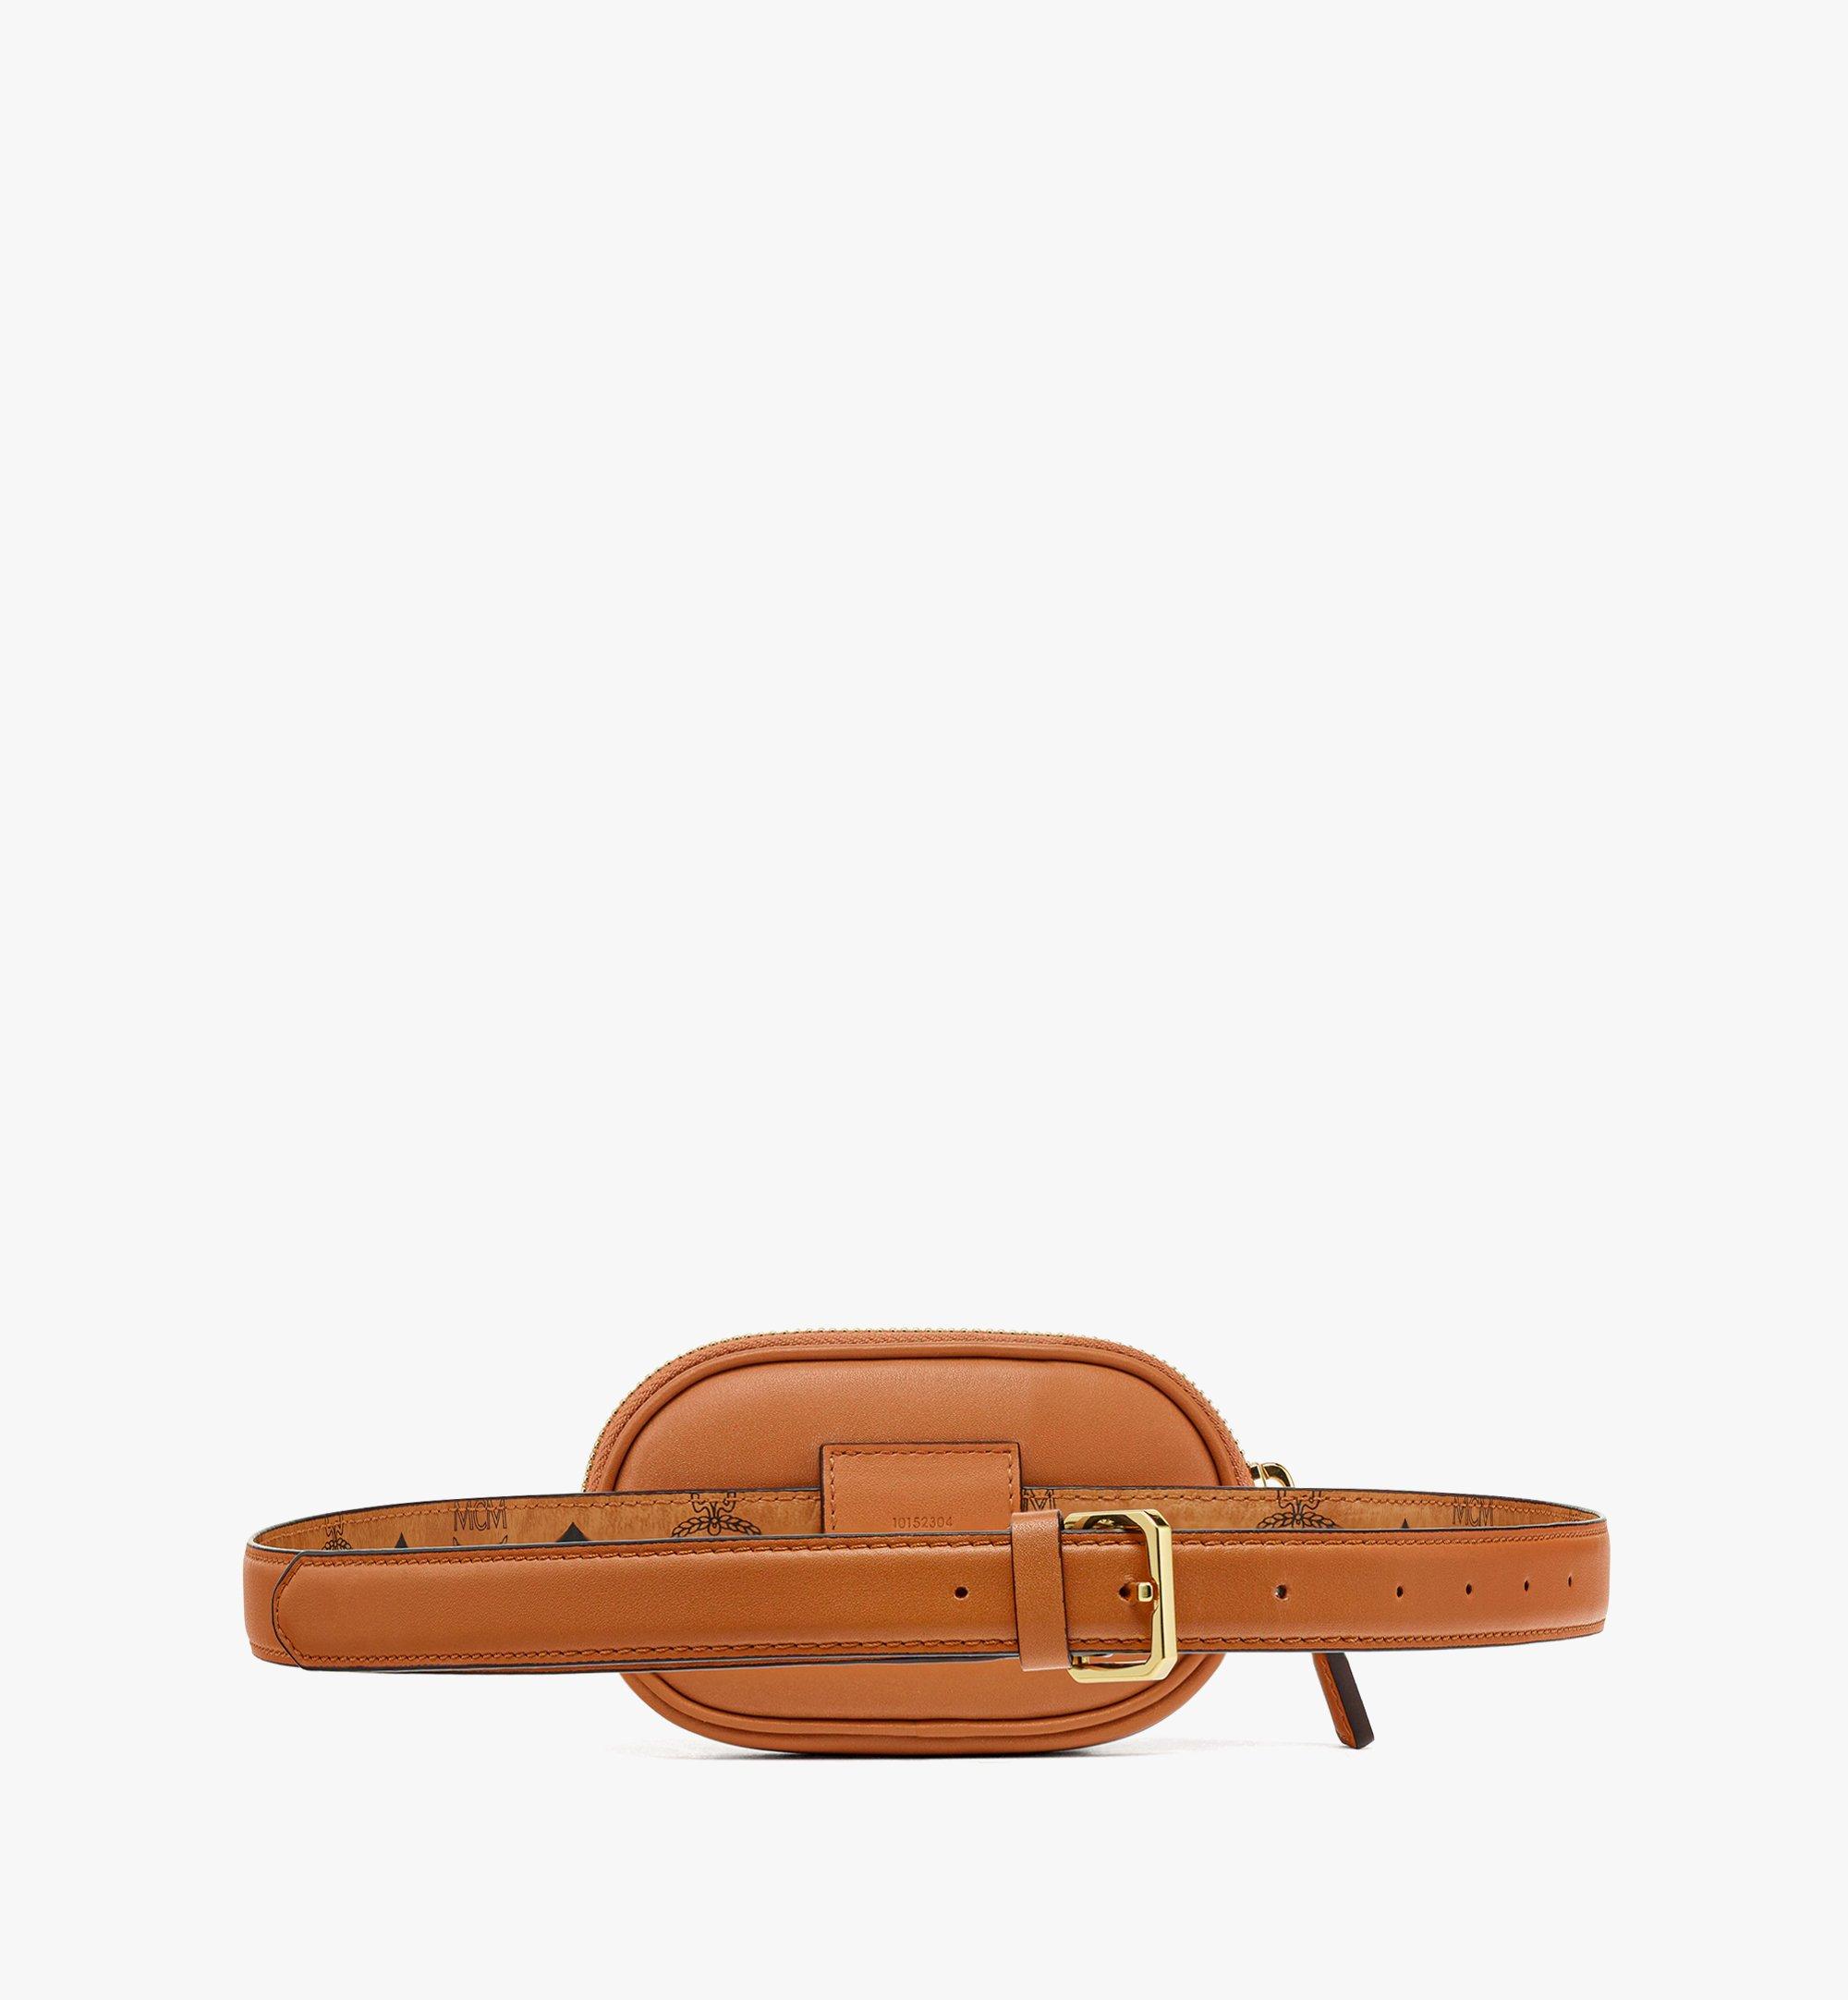 MCM Mode Travia Belt w/ Zip Pouch in Nappa Leather Cognac MYBDALD04CO110 Alternate View 2